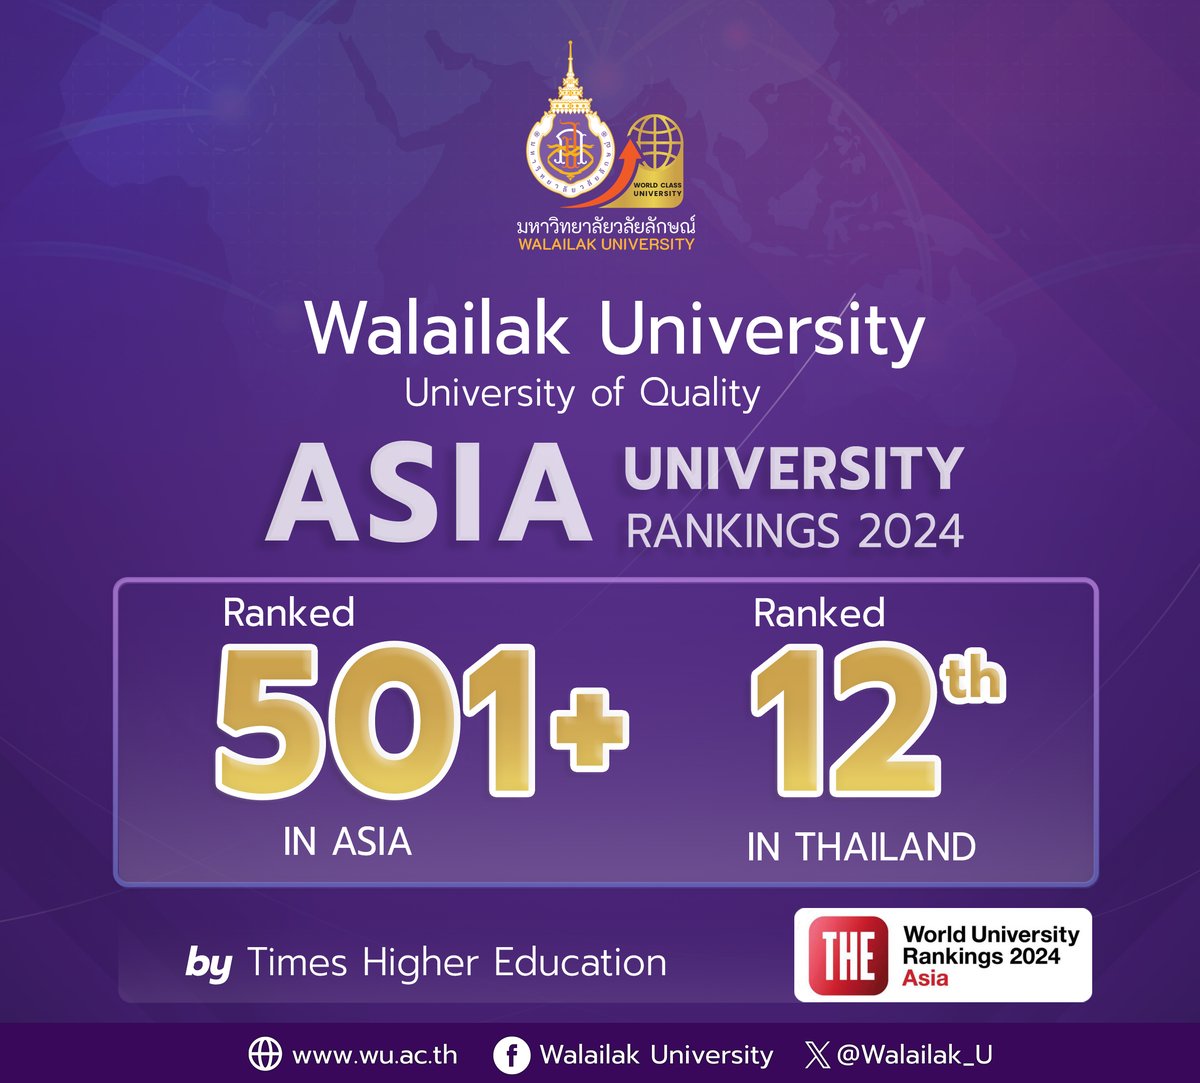 Walailak University Moves Up to 501-600 in Times Higher Education Asia University Rankings 2024 Read more at wu.ac.th/en/news/24081/